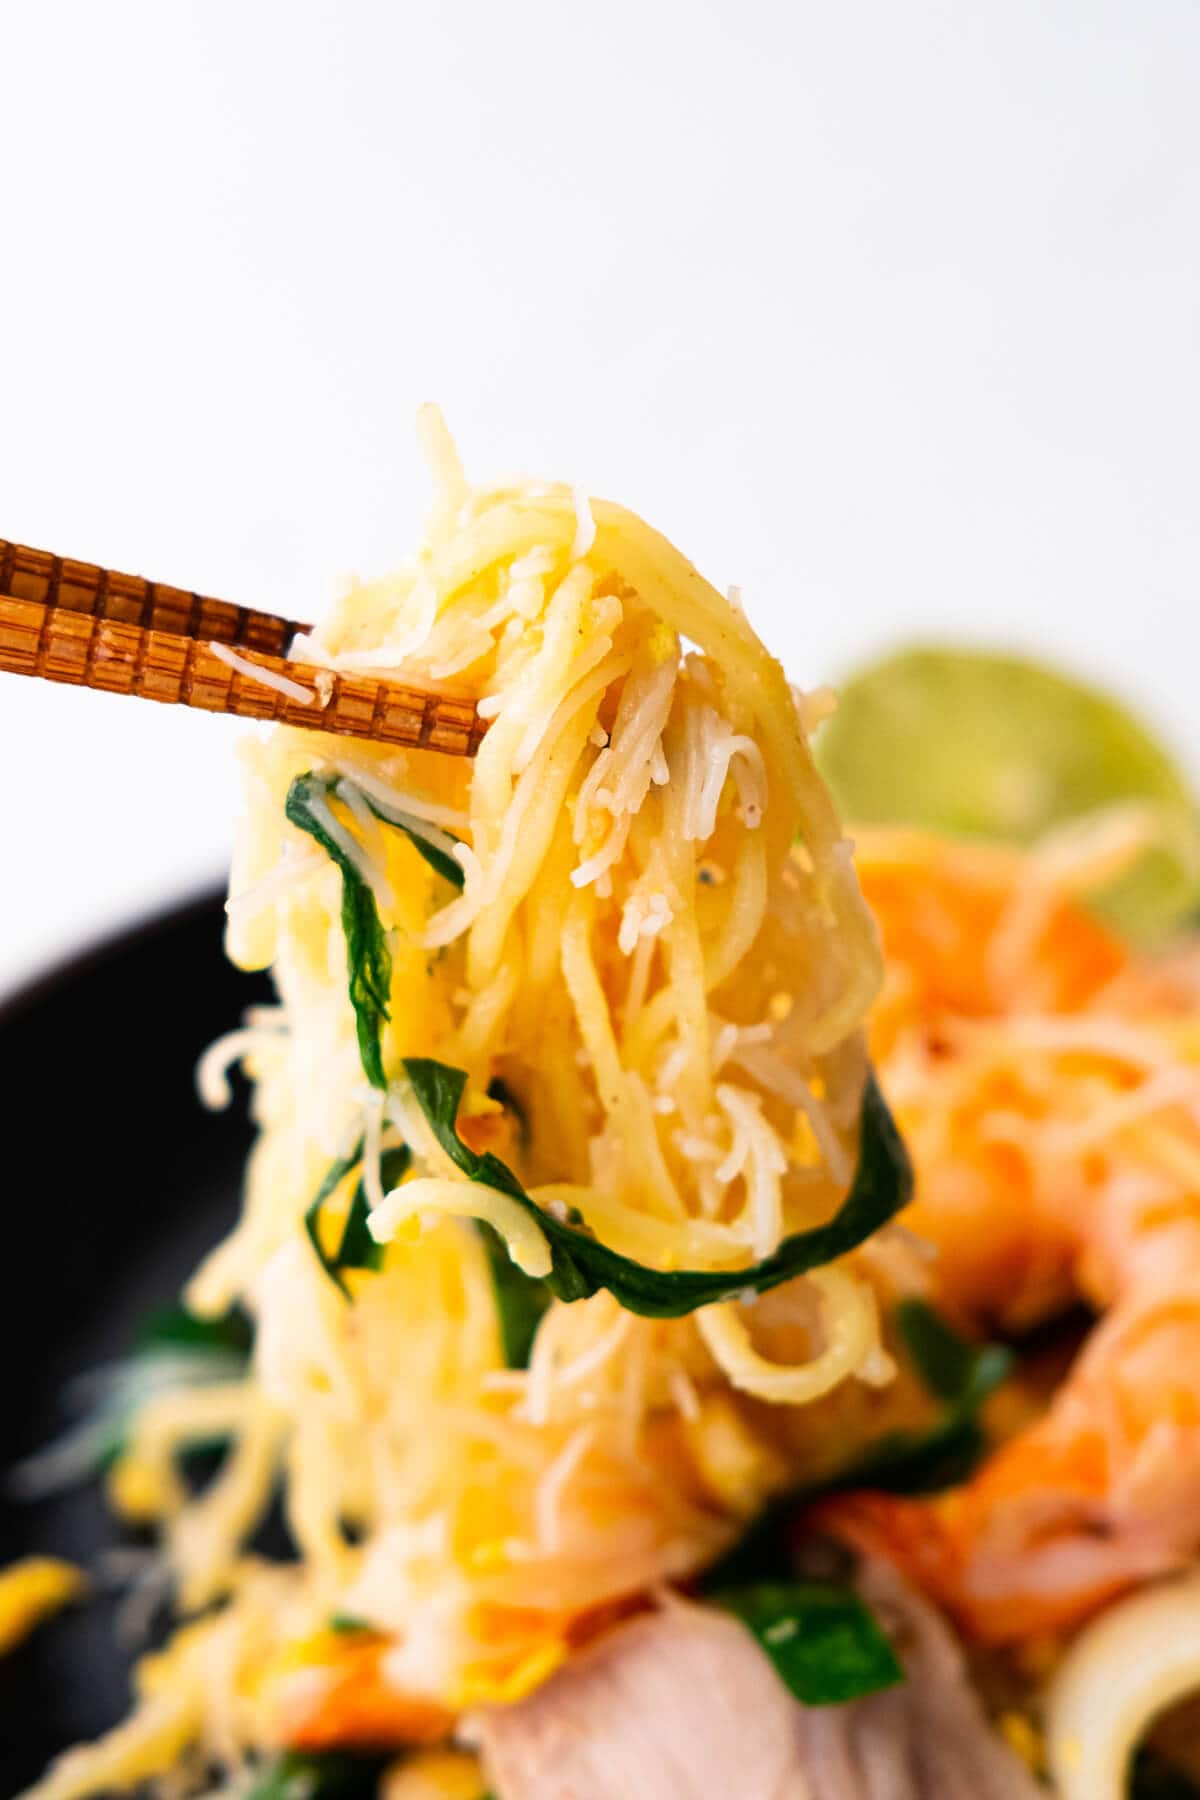 The stir-fried yellow noodles and rice vermicelli have absorbed all the flavor from the sauce and are picked up with chopsticks.